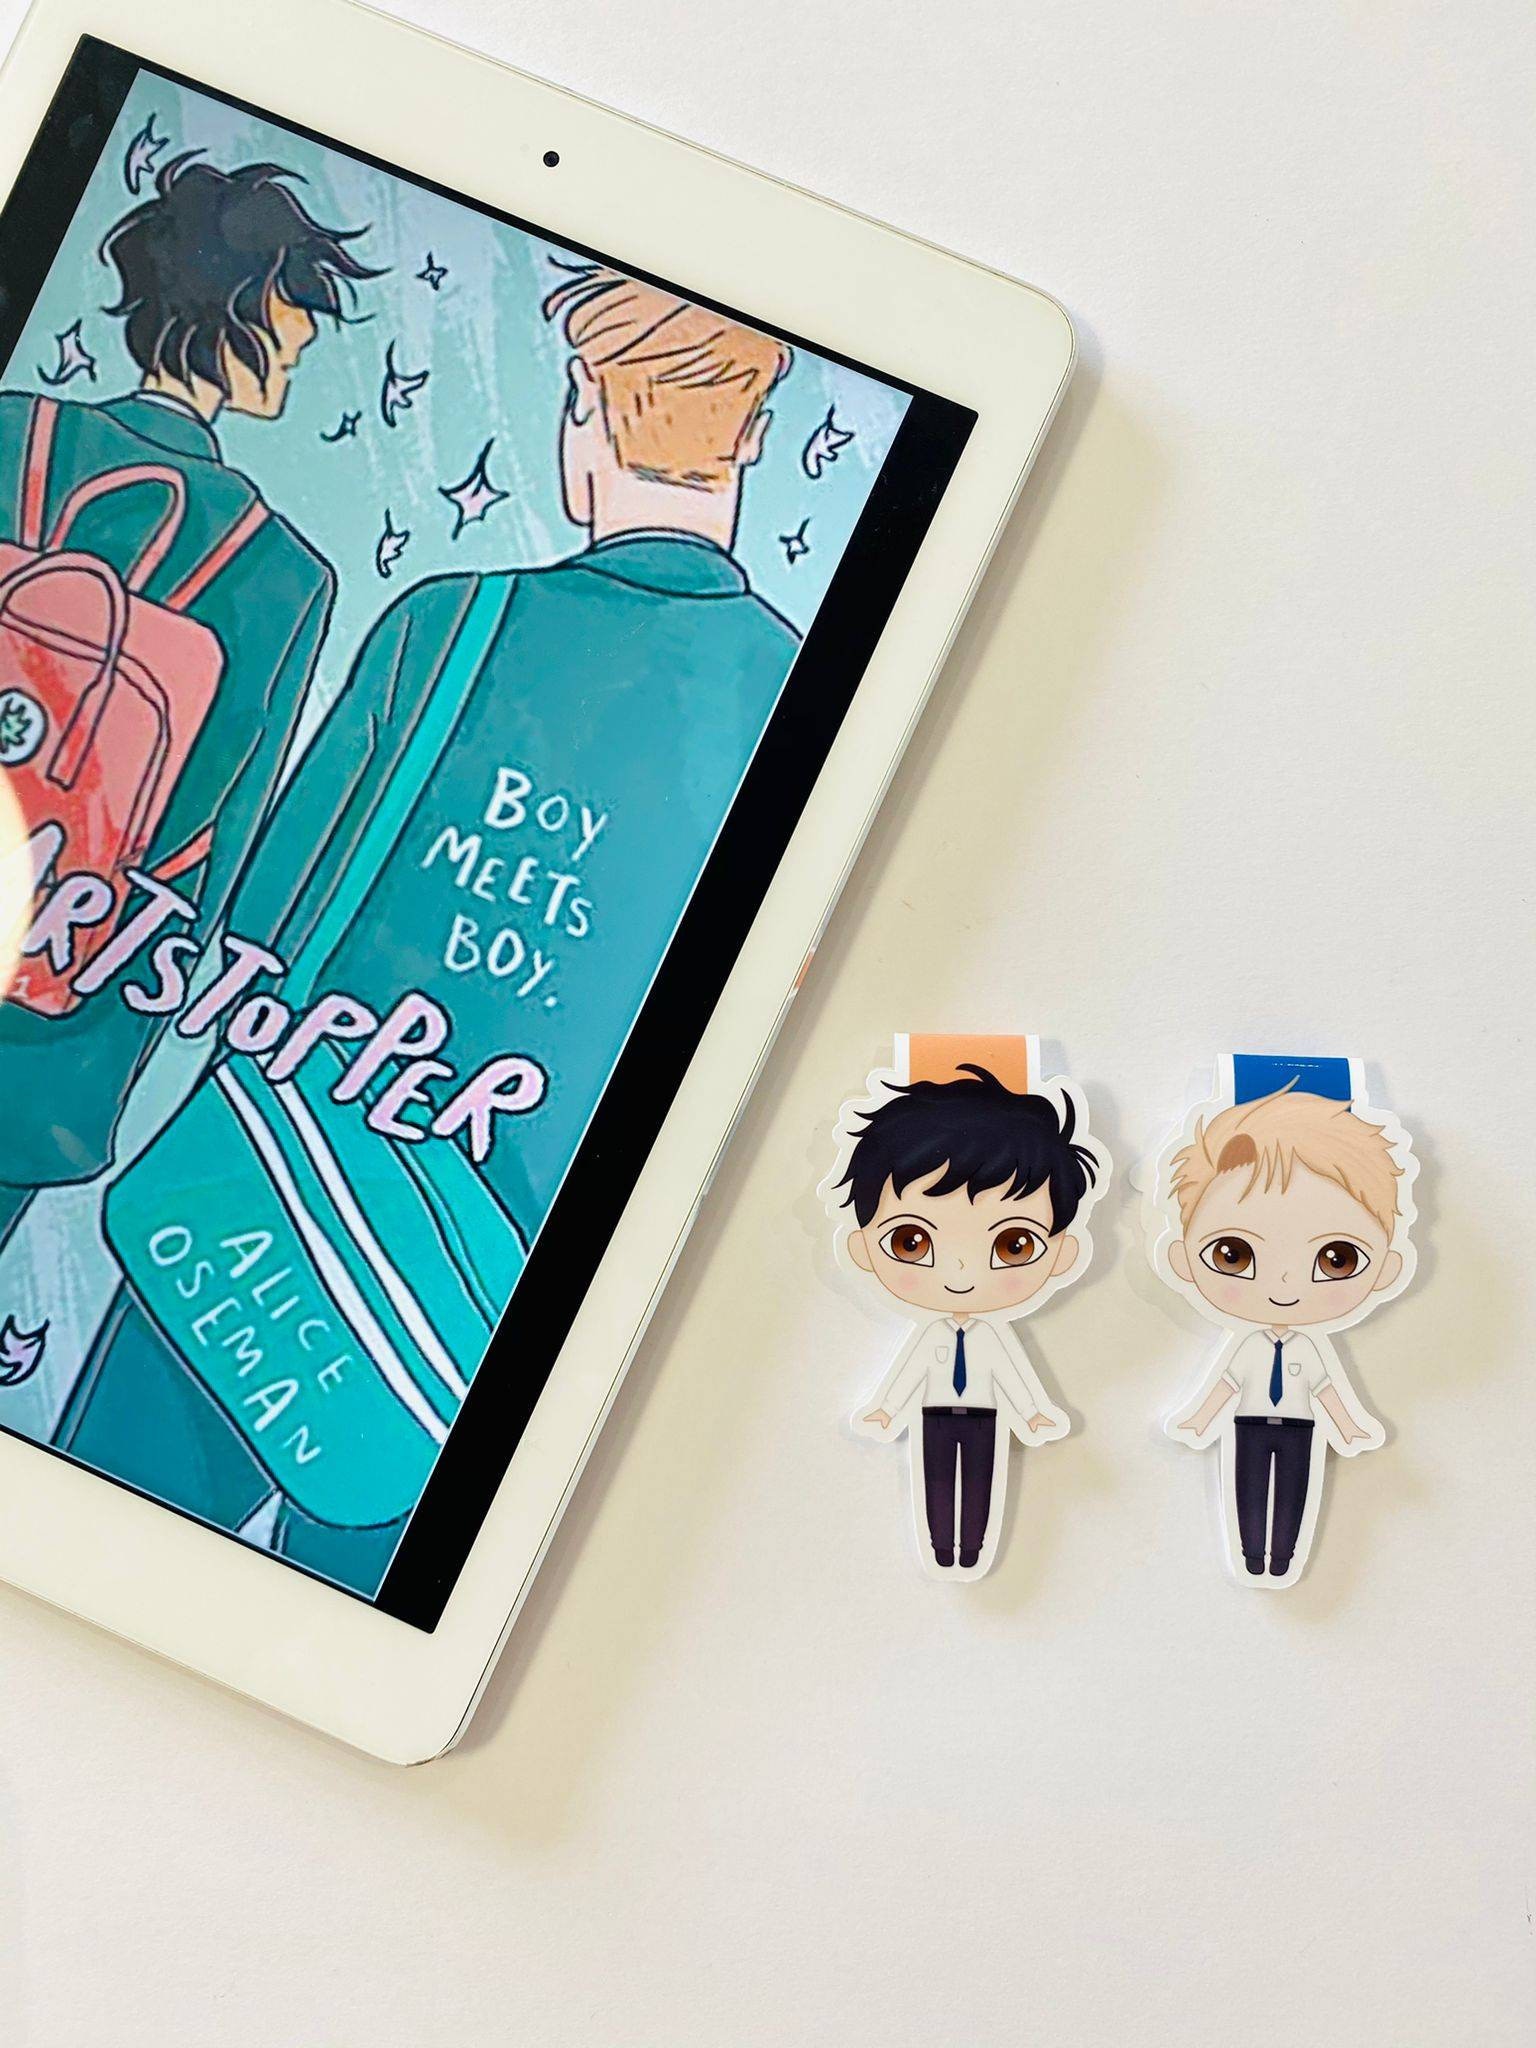 Nick and Charlie heartstopper Paper Laminated or Magnetic Bookmark Handmade  Bookshelf Decor Romance Couple Book Accessories LBGT 